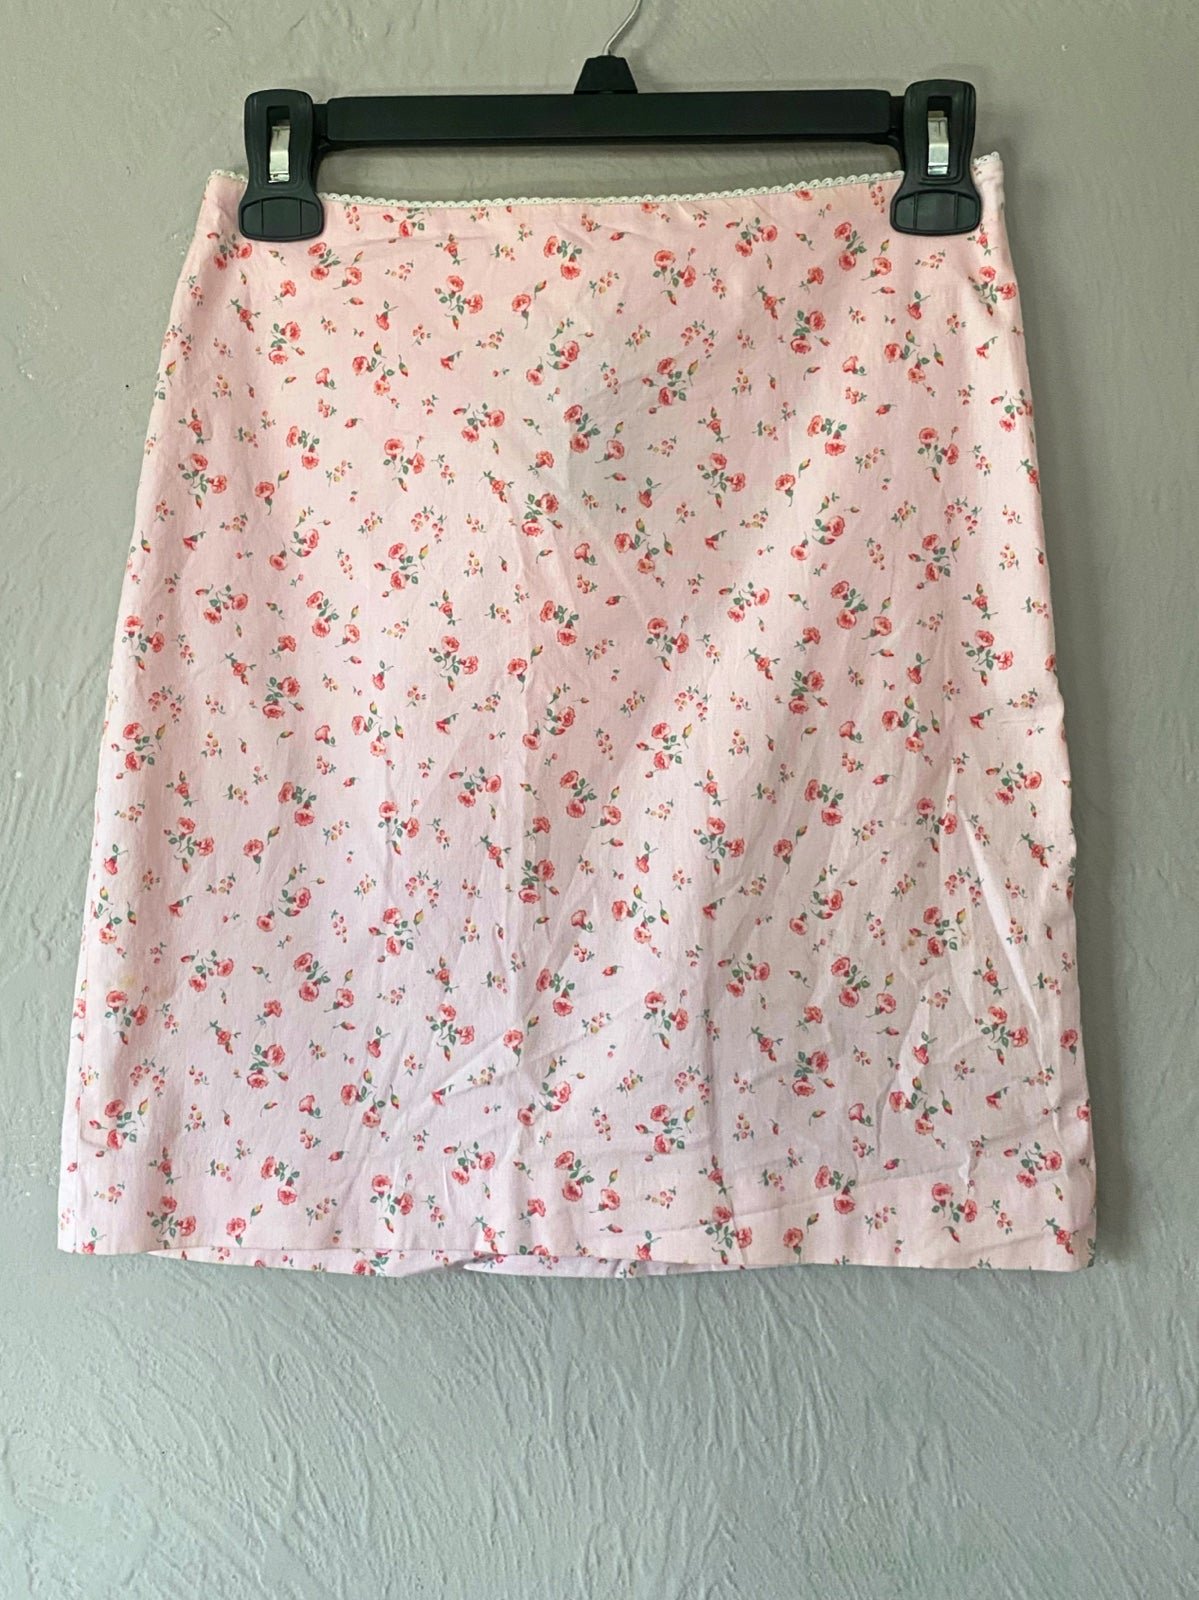 cheapest place to buy  Pink Floral Mini Skirt lWcbrbNz5